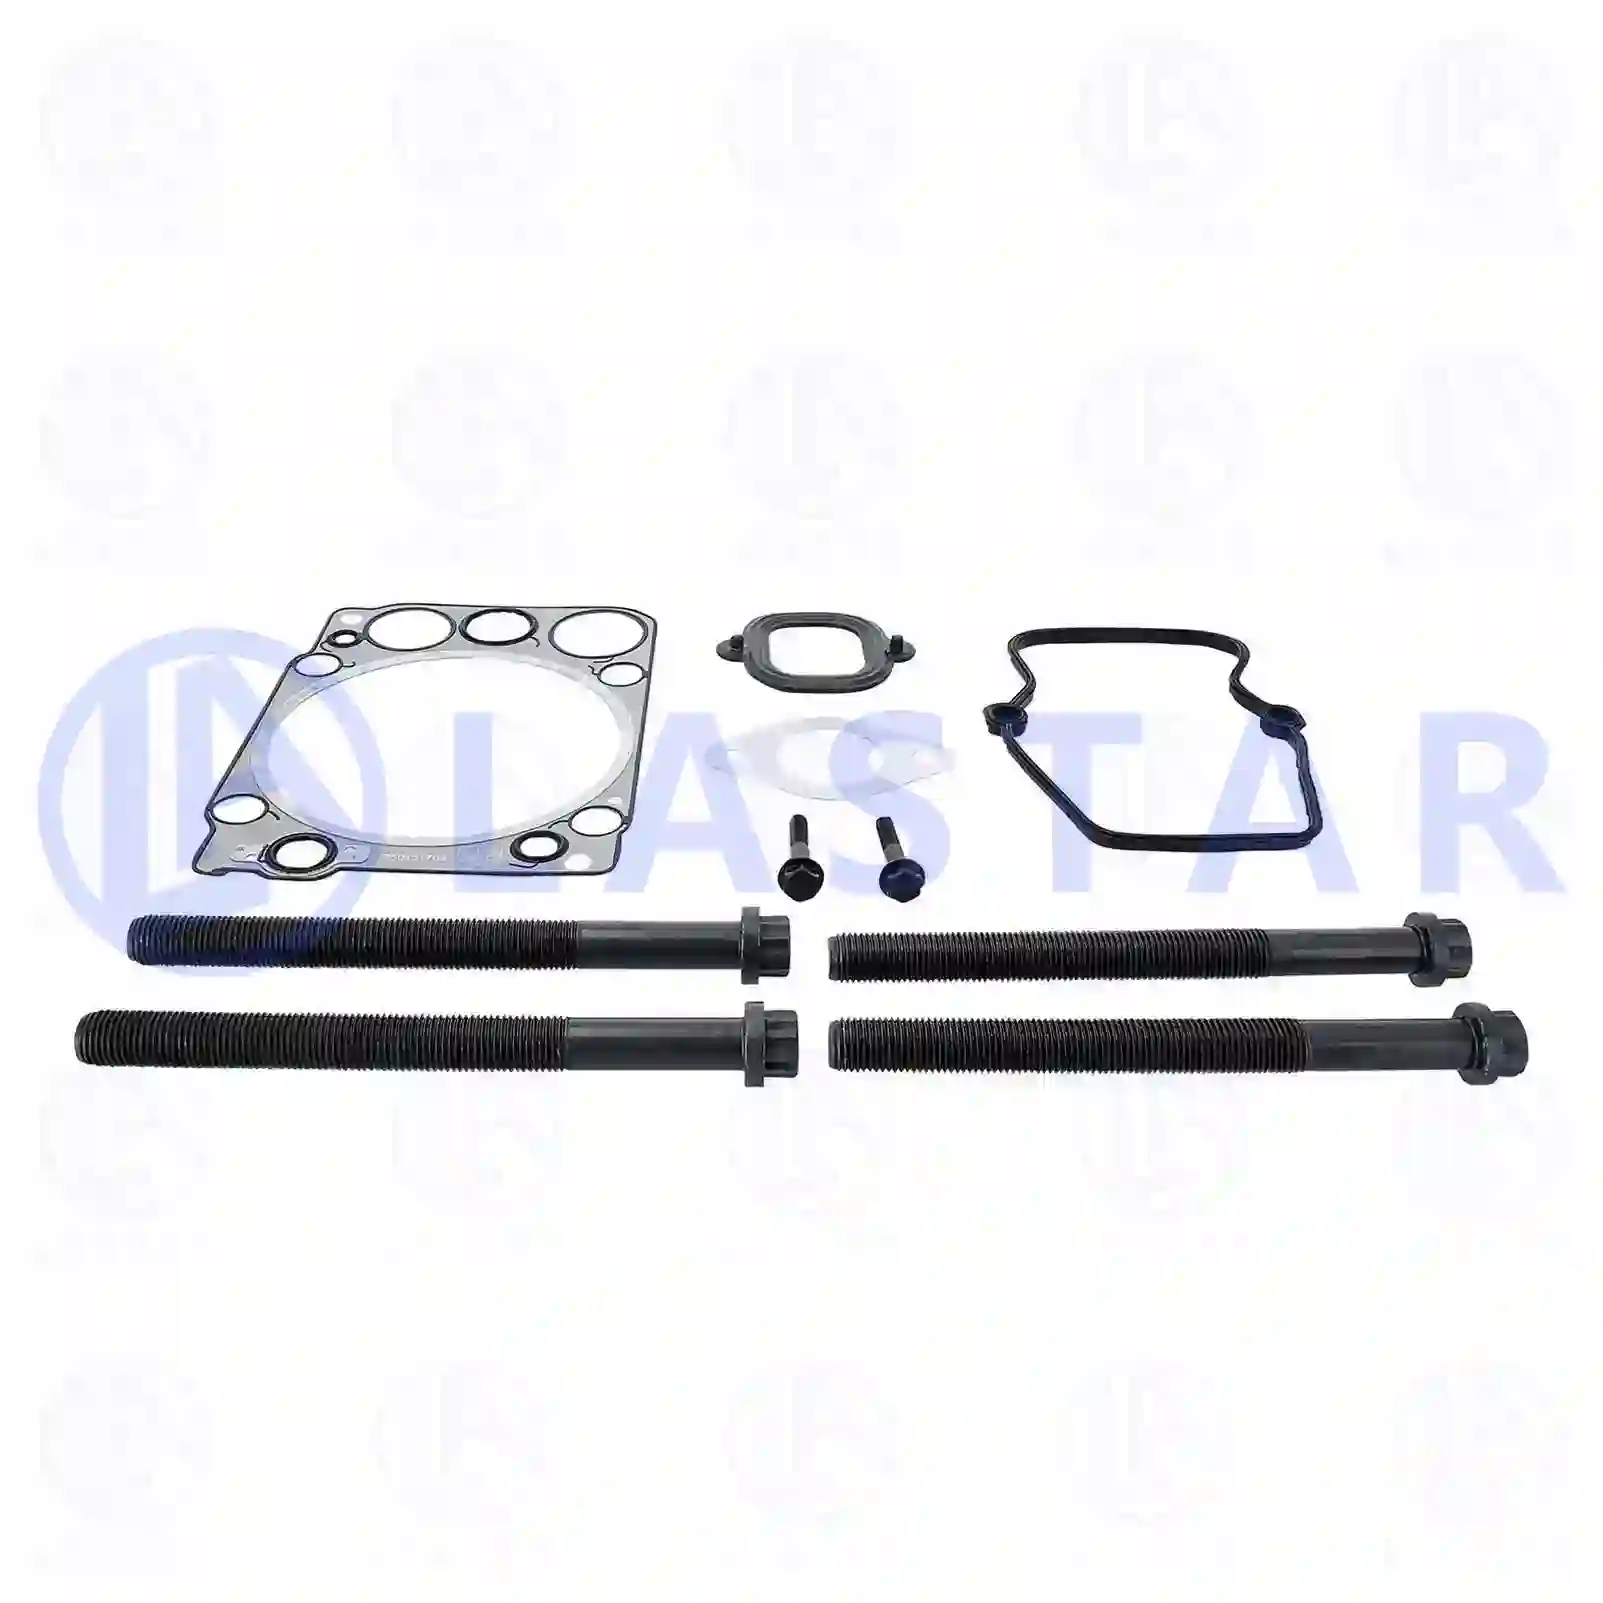 Cylinder head gasket kit, 77702692, 3529904601S1, 4570160221S1, 4601420080S1, 5410101621S1, 5410161720S1, 5410980480S1, 5419900501S2 ||  77702692 Lastar Spare Part | Truck Spare Parts, Auotomotive Spare Parts Cylinder head gasket kit, 77702692, 3529904601S1, 4570160221S1, 4601420080S1, 5410101621S1, 5410161720S1, 5410980480S1, 5419900501S2 ||  77702692 Lastar Spare Part | Truck Spare Parts, Auotomotive Spare Parts